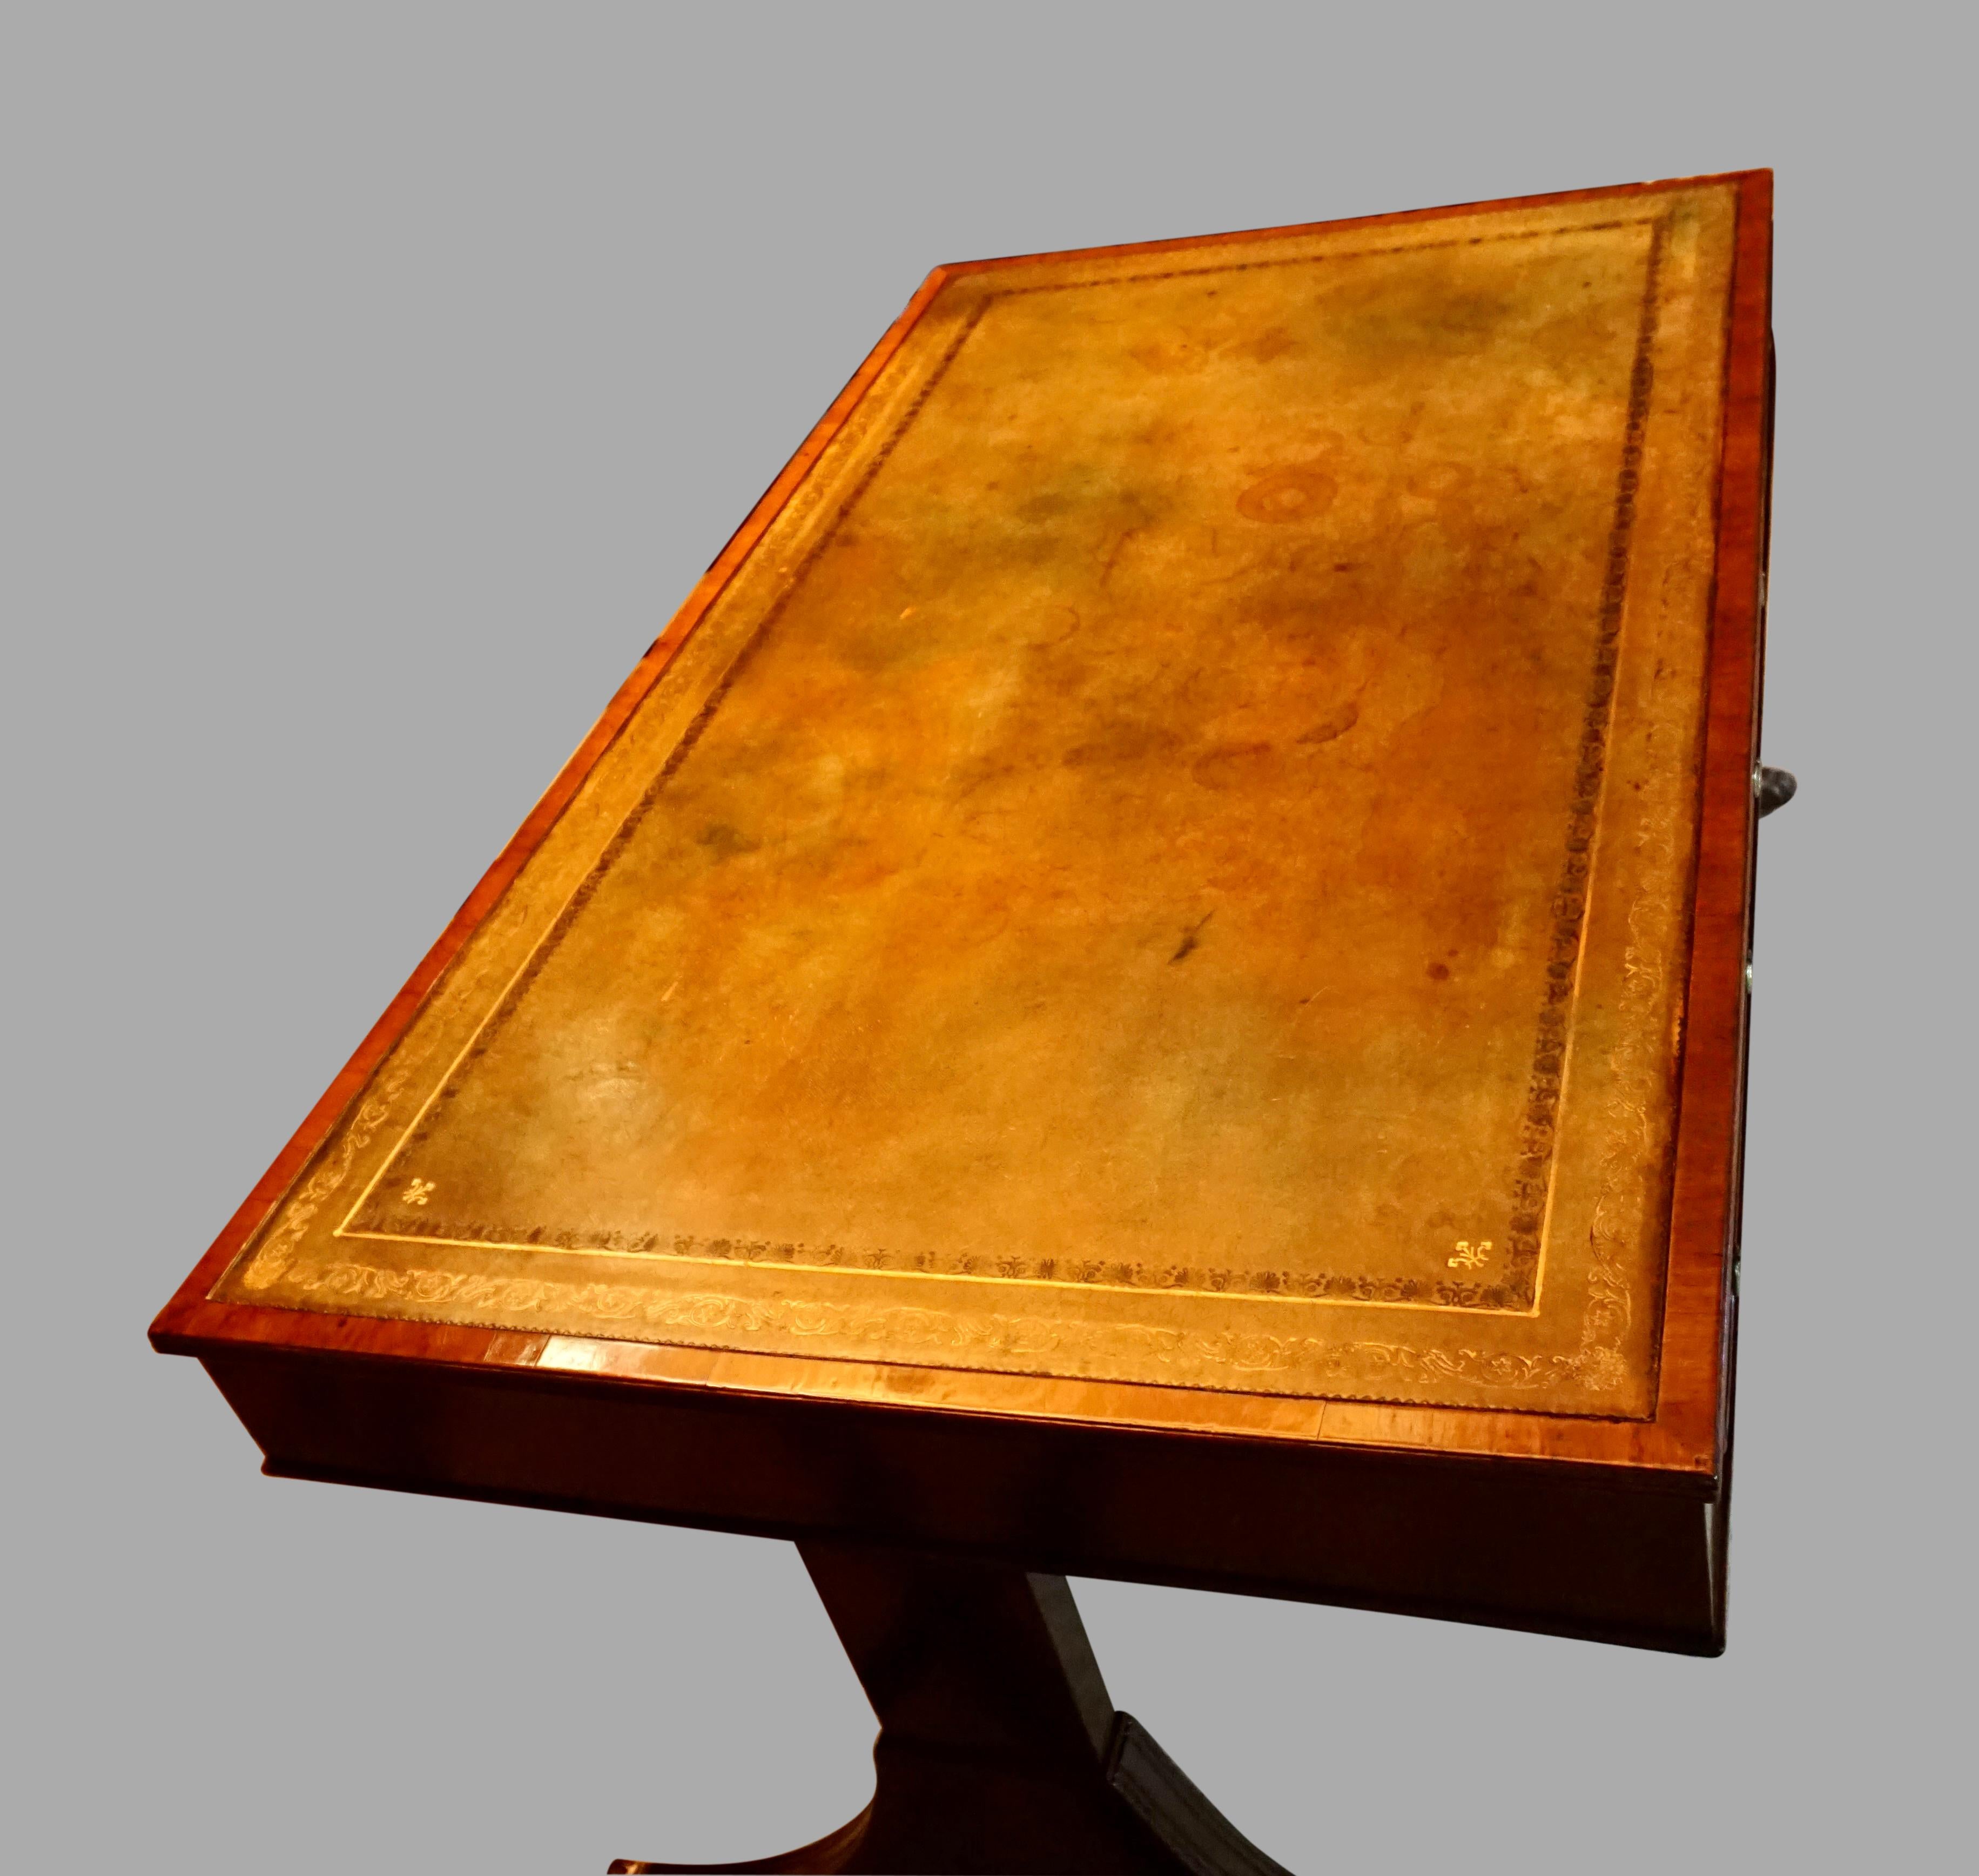 English Regency Style Mahogany Writing Table with Gilt-Tooled Leather Top For Sale 2